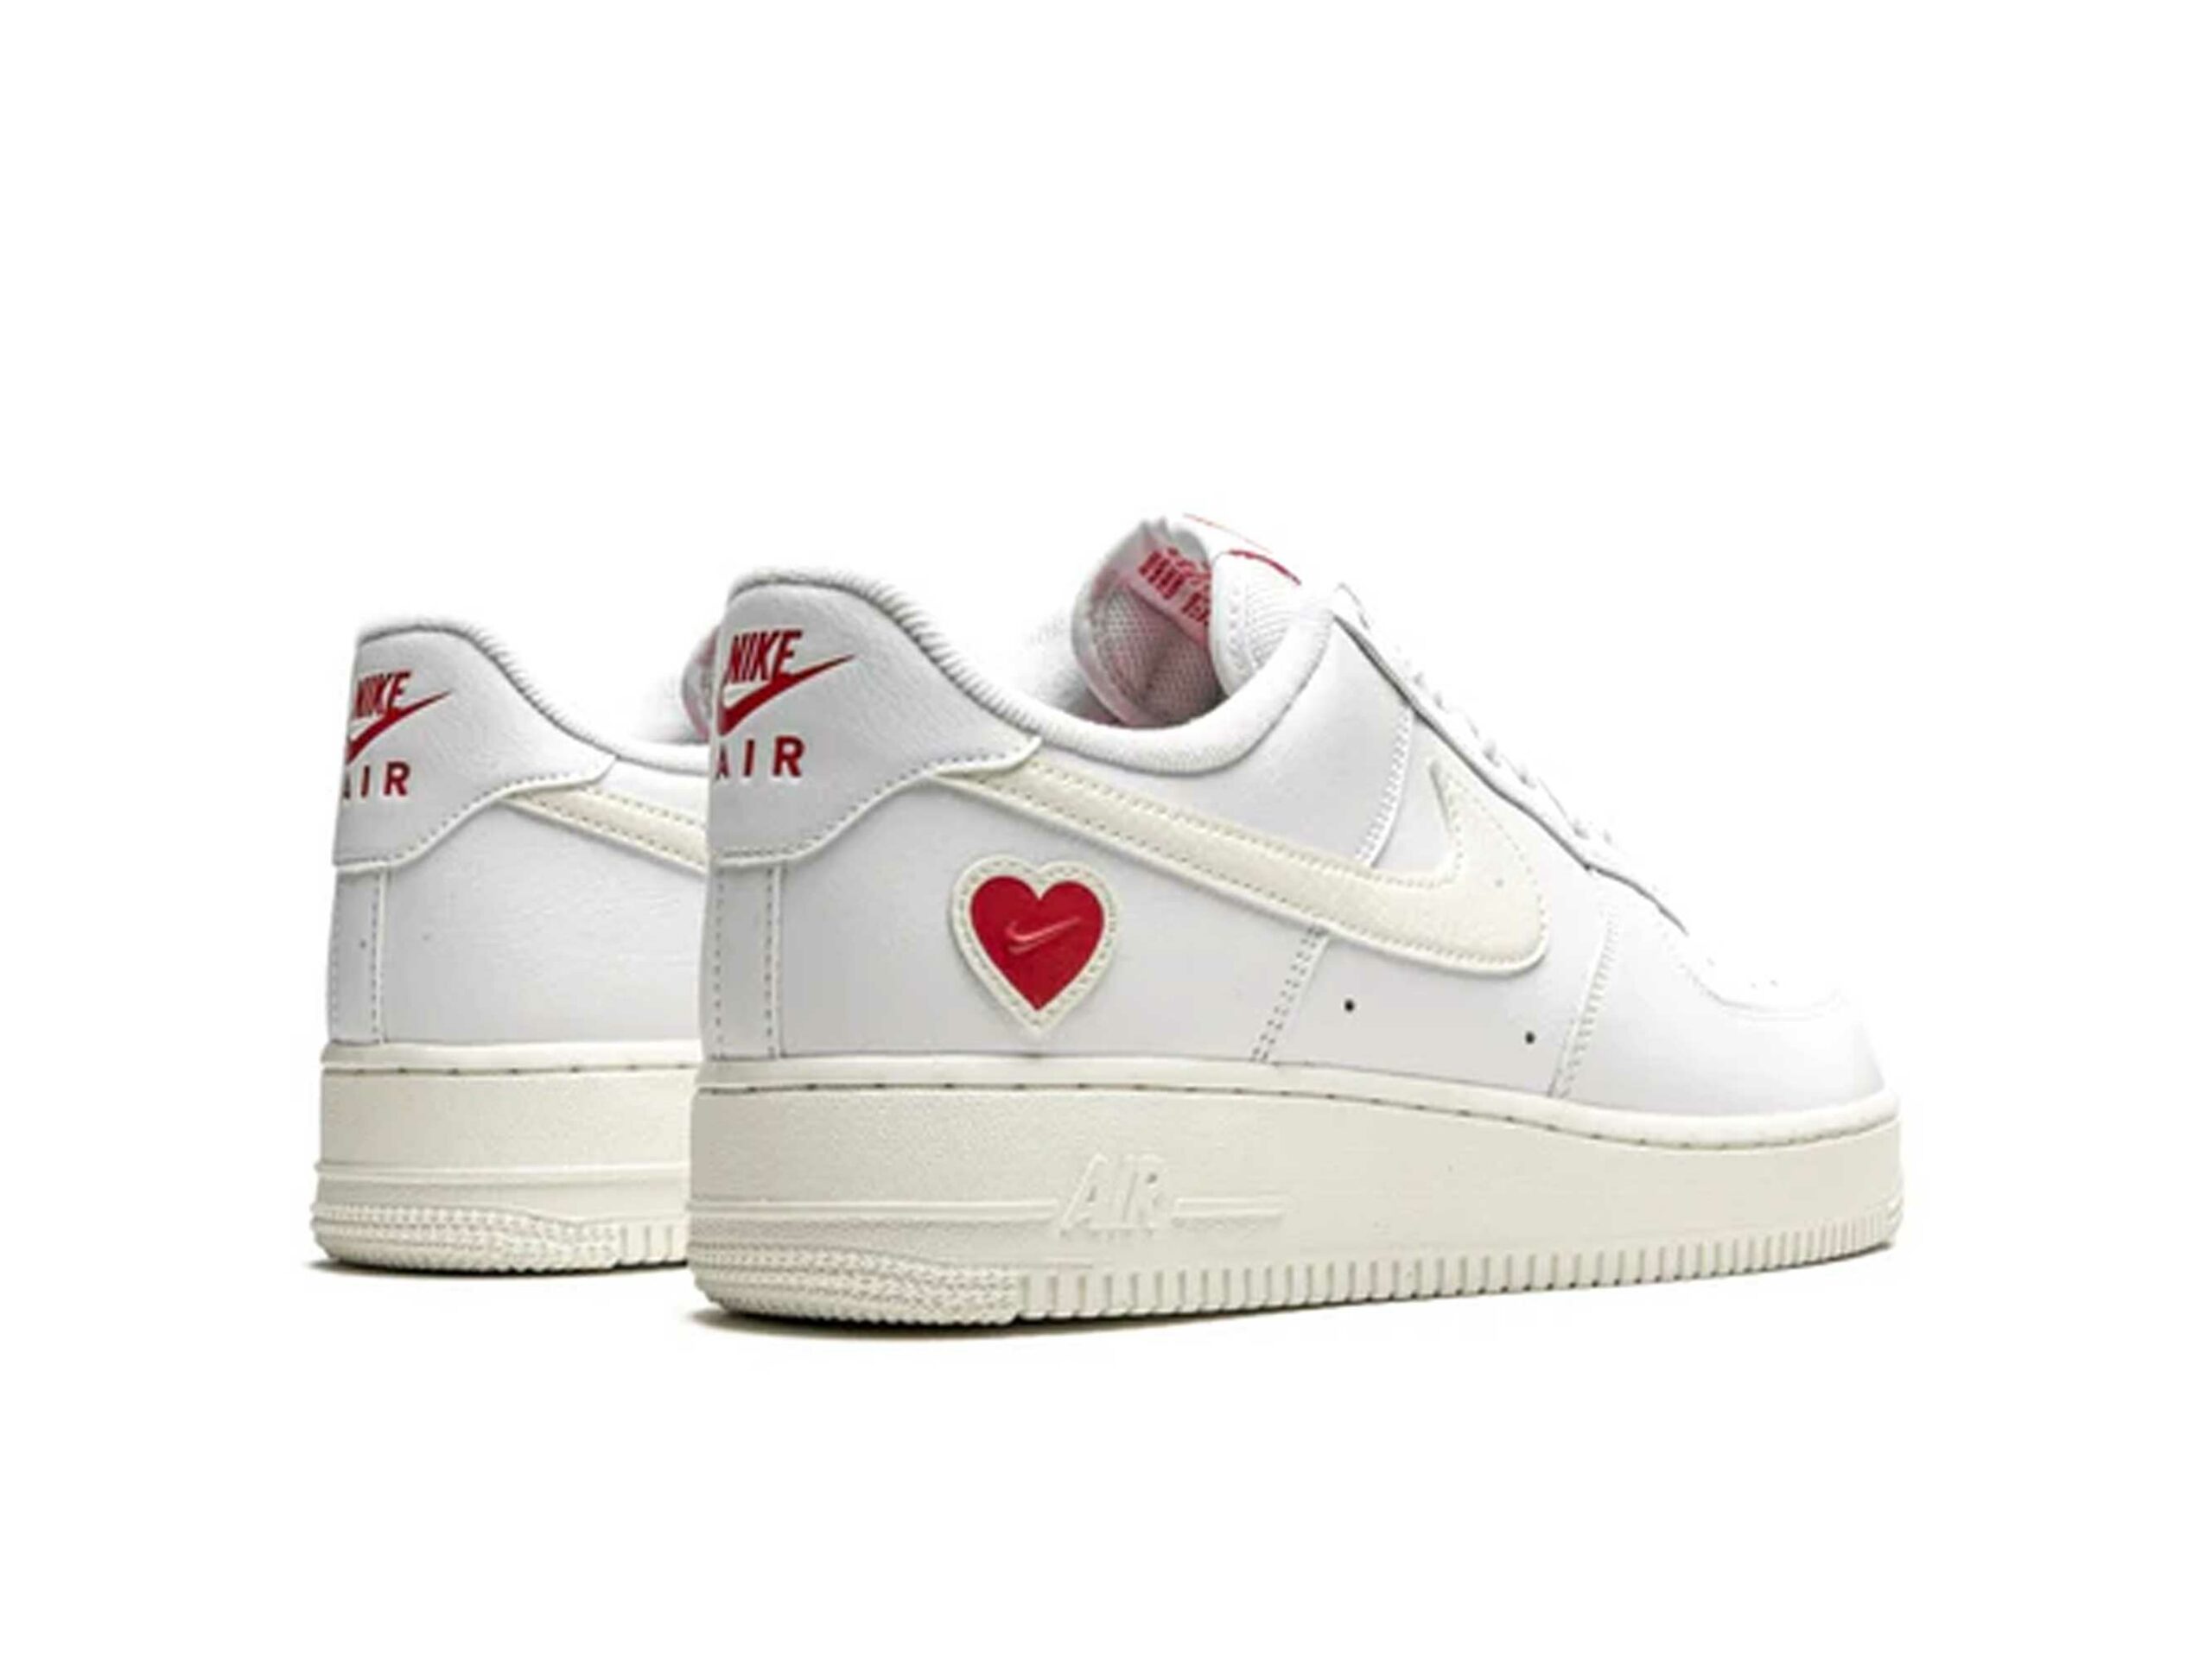 Nike air valentines day. Nike Air Force 1 Low Valentines Day 2021. Nike Air Force 1 Low “Valentine’s Day” 2023. Nike Air Force 1 Valentines Day 2021. Nike Air Force 1’07 “Valentines Day” (2021).